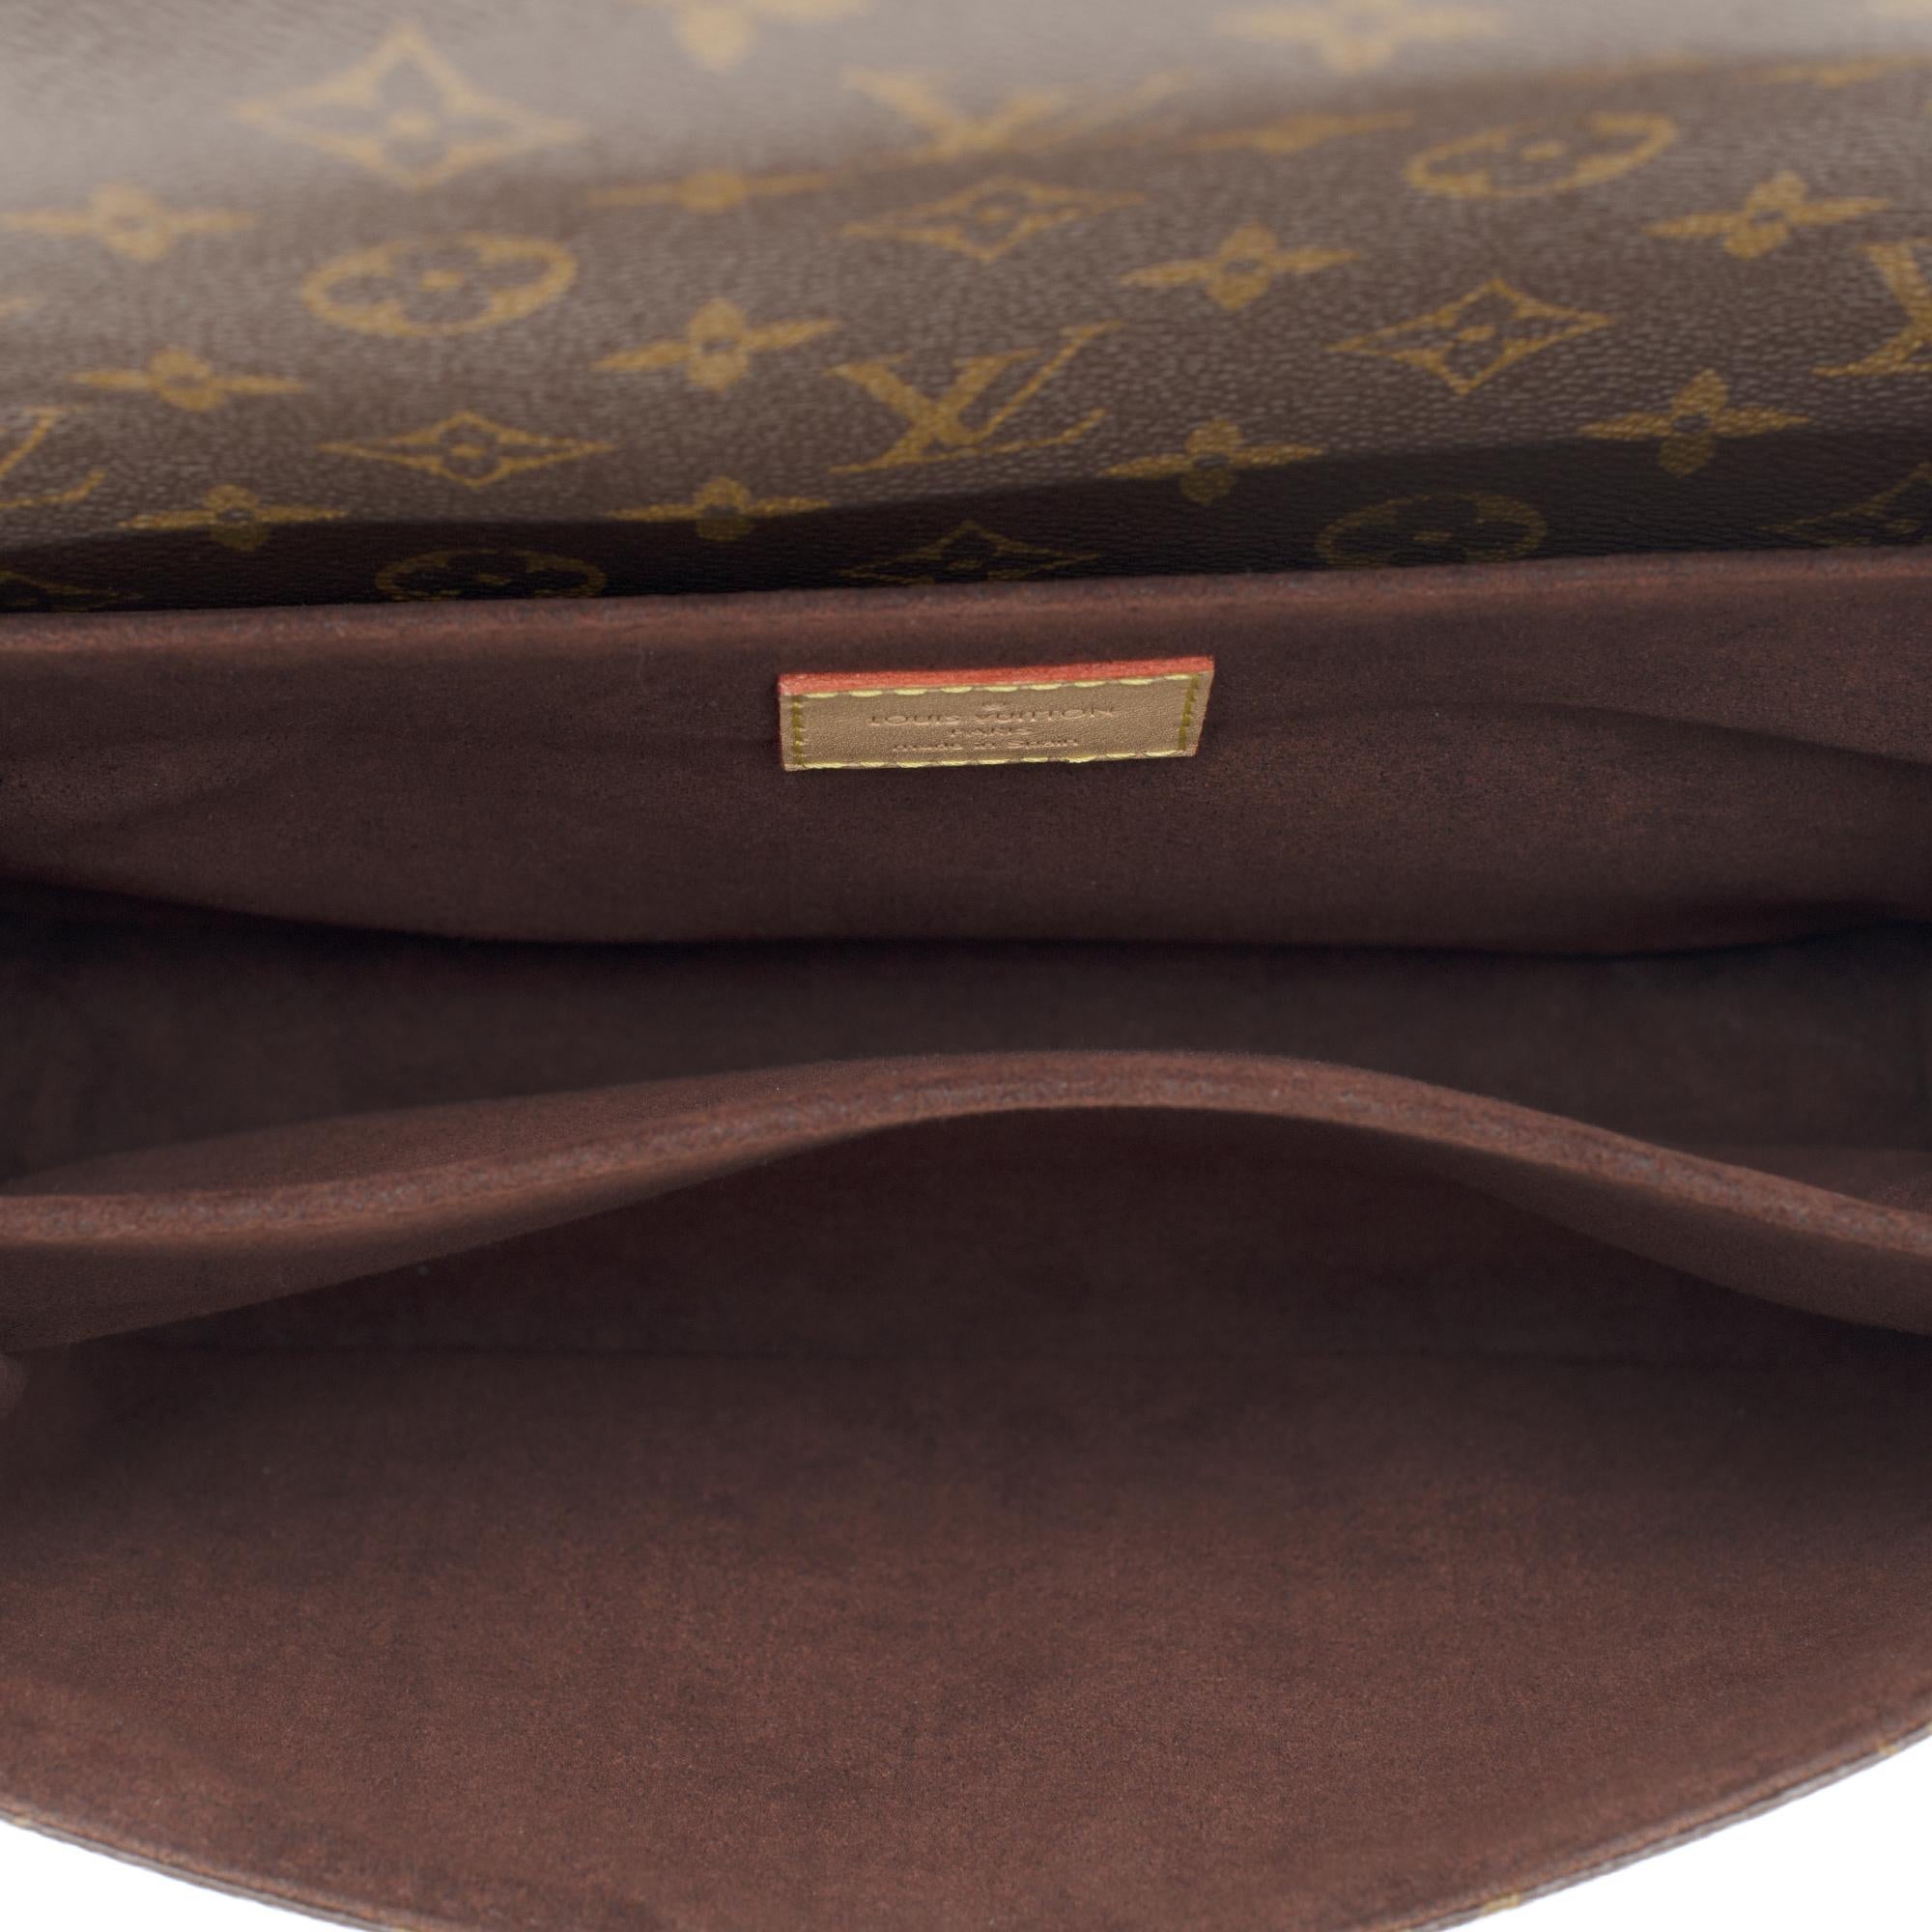 Brand New -The Must have Louis Vuitton Metis Shoulder bag in Monogram canvas ! 1